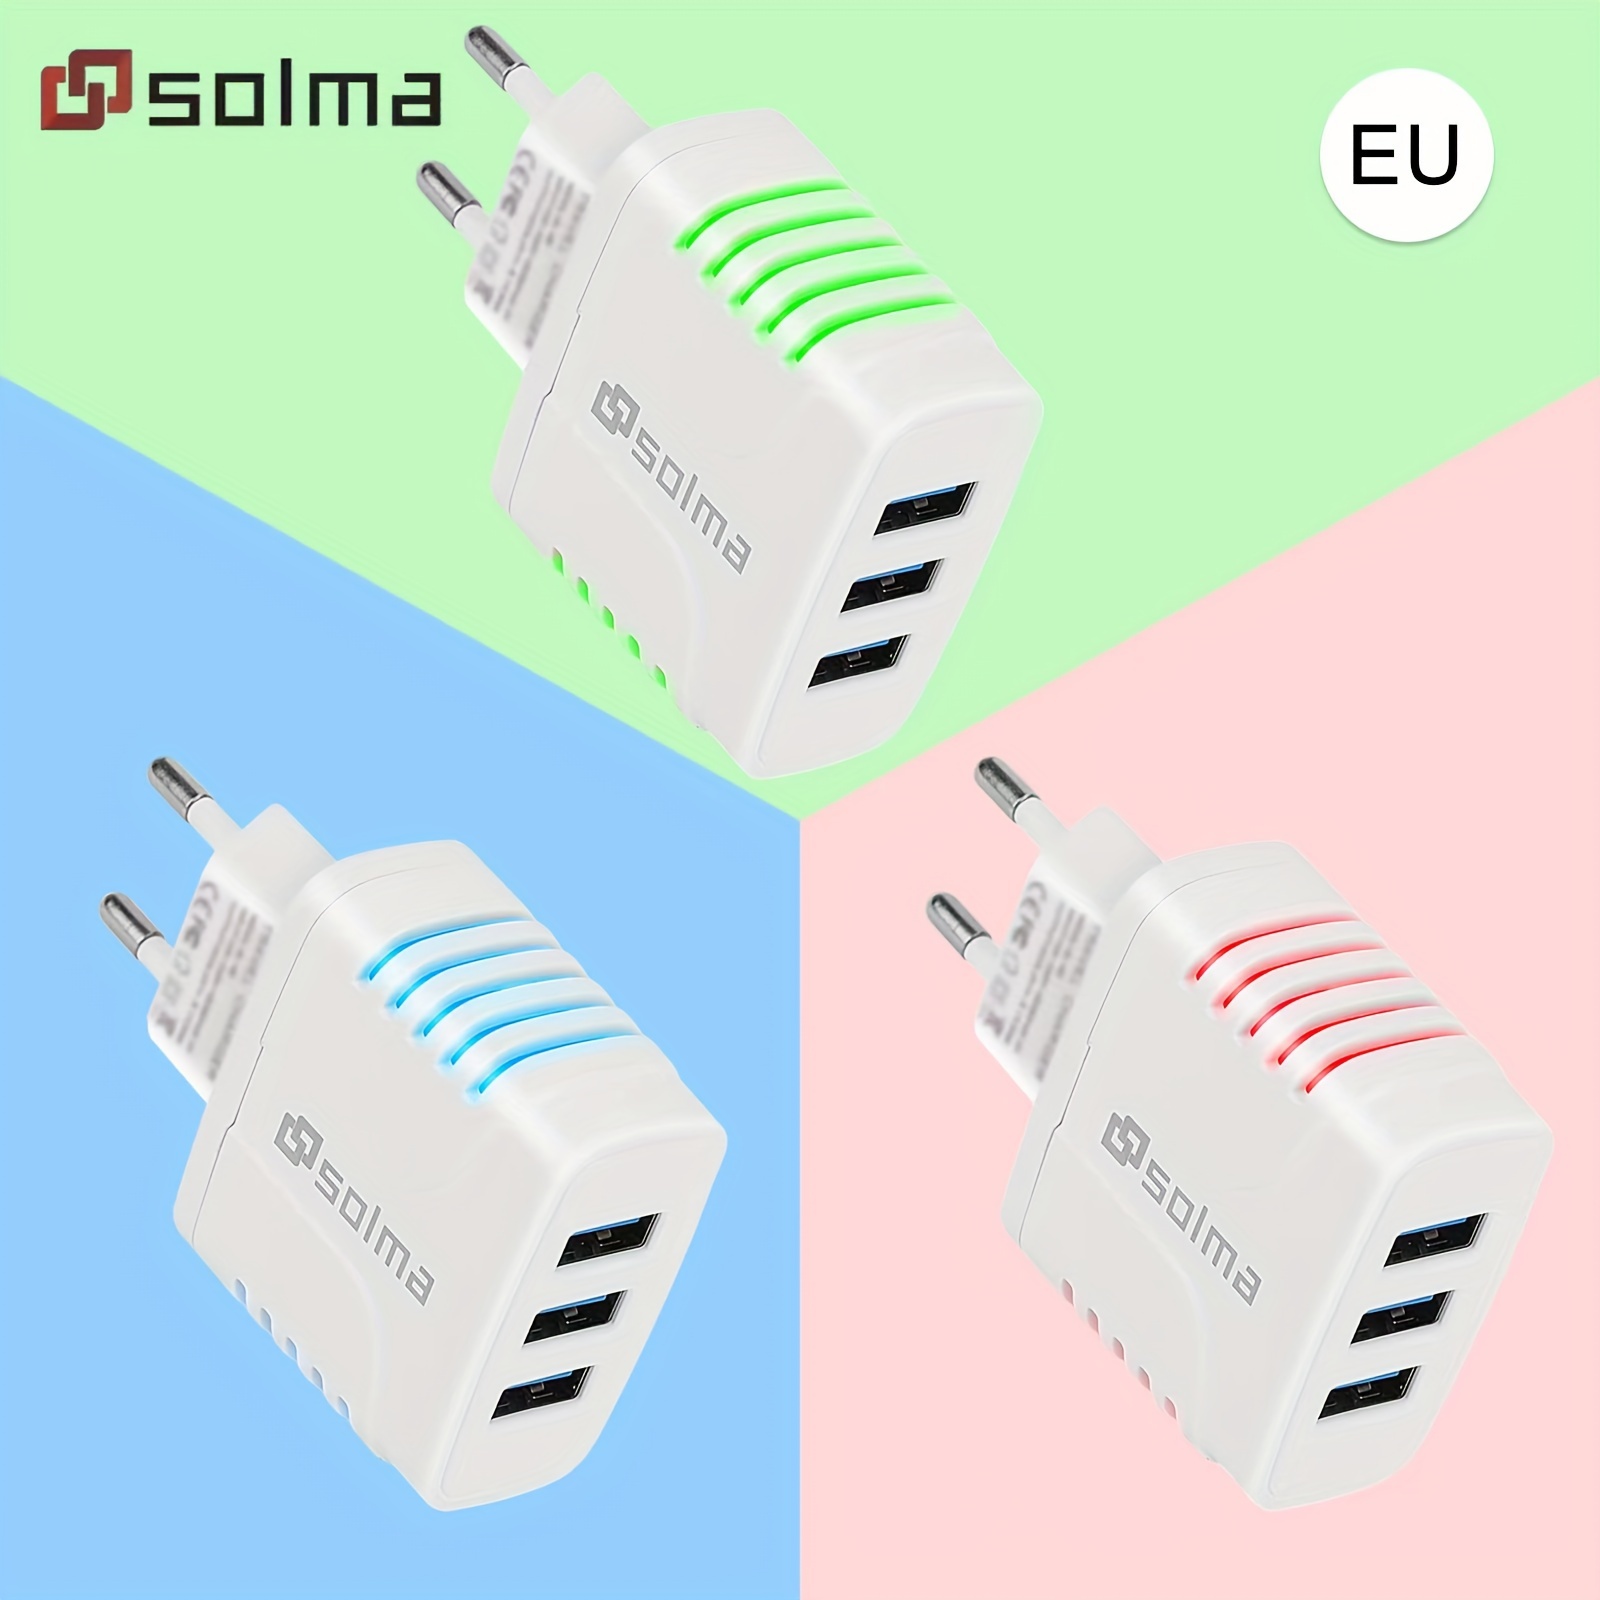 

1pc 3-port Usb Wall Charger Adapter Candy Color For Mobile Phone Travel Charger Led Charging Lndicator Travel 3usb Port Multi Intelligent Head Luminous Port Battery Charger